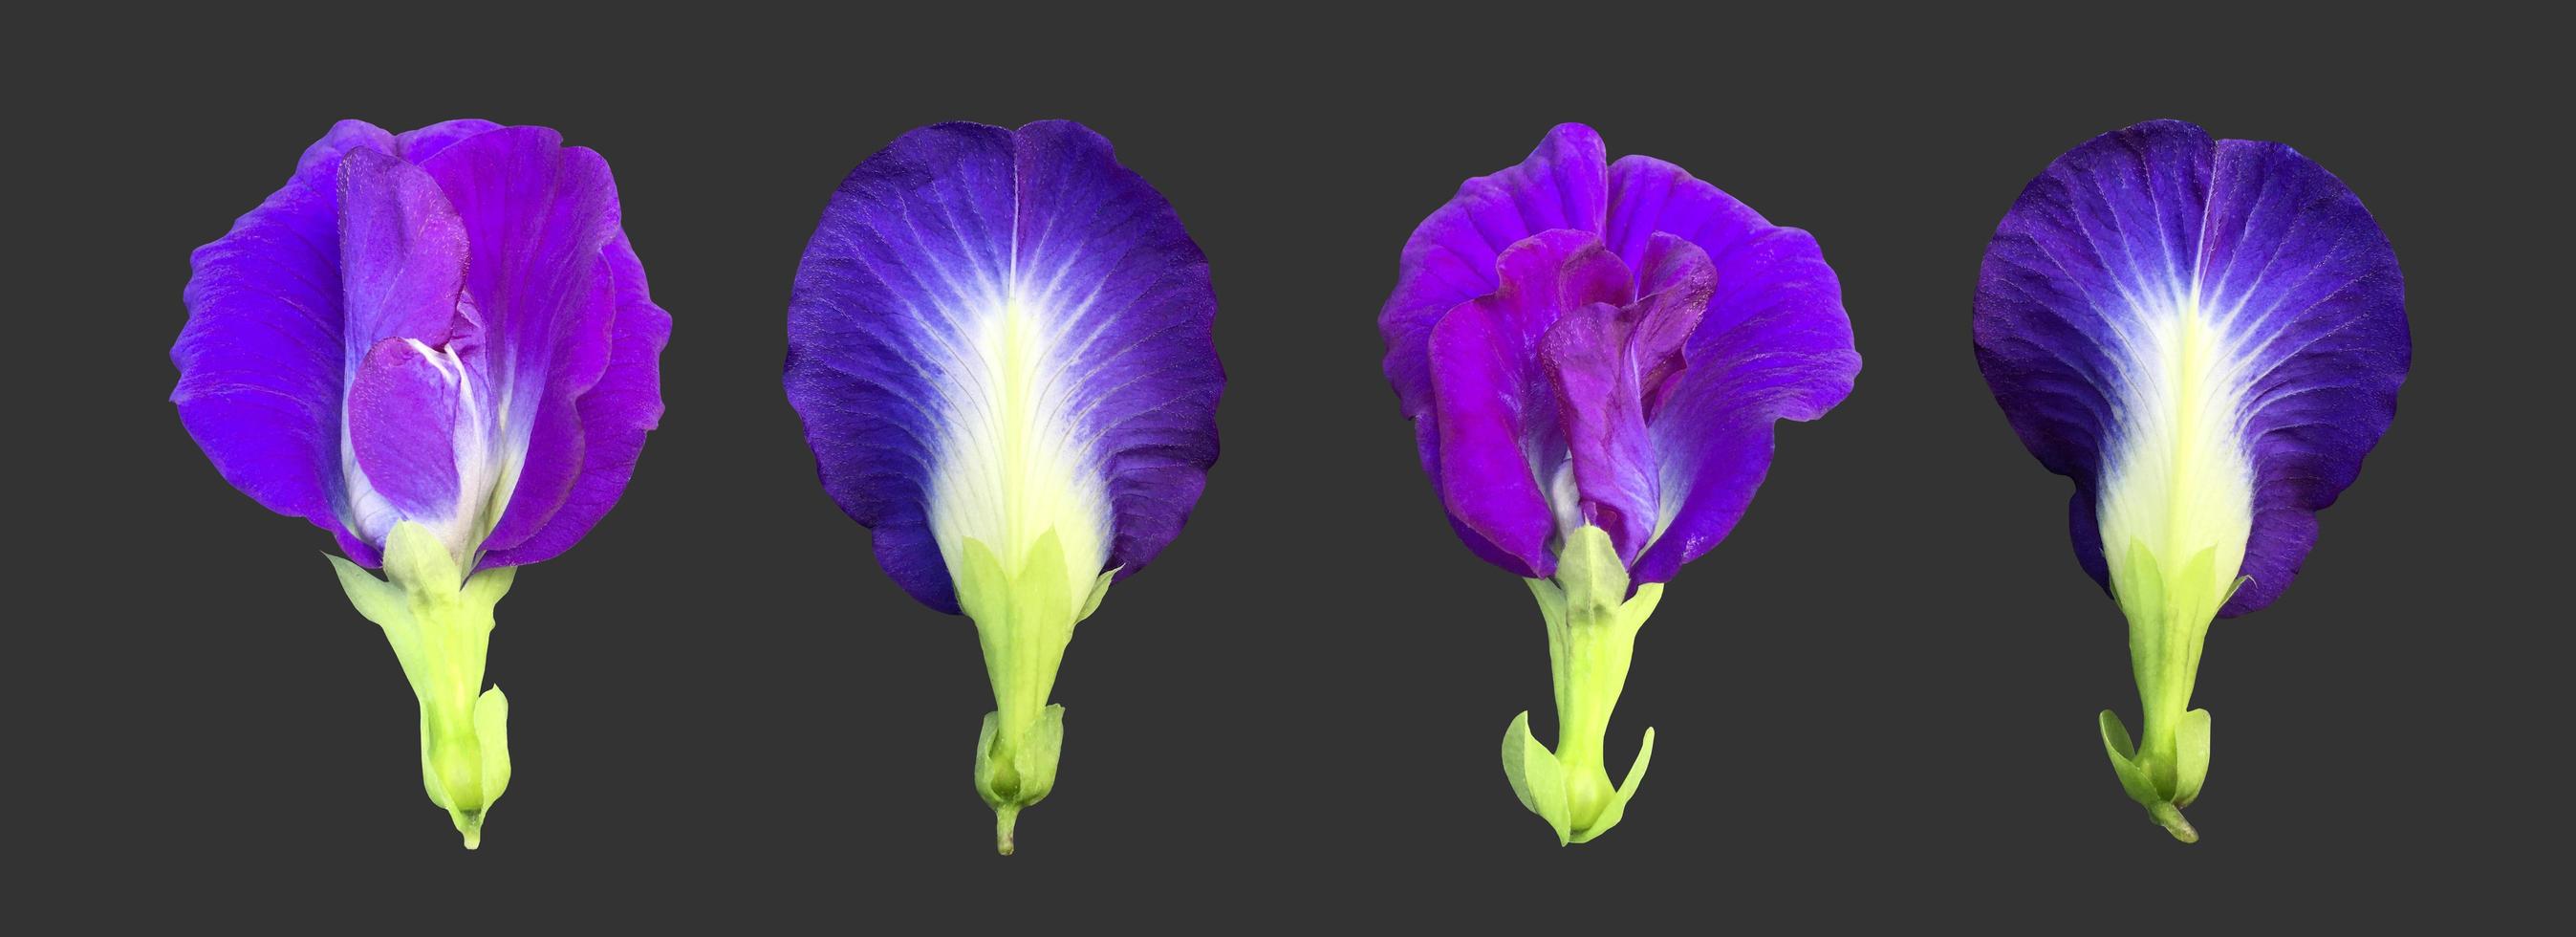 Isolated butterfly pea flower with clipping paths. photo